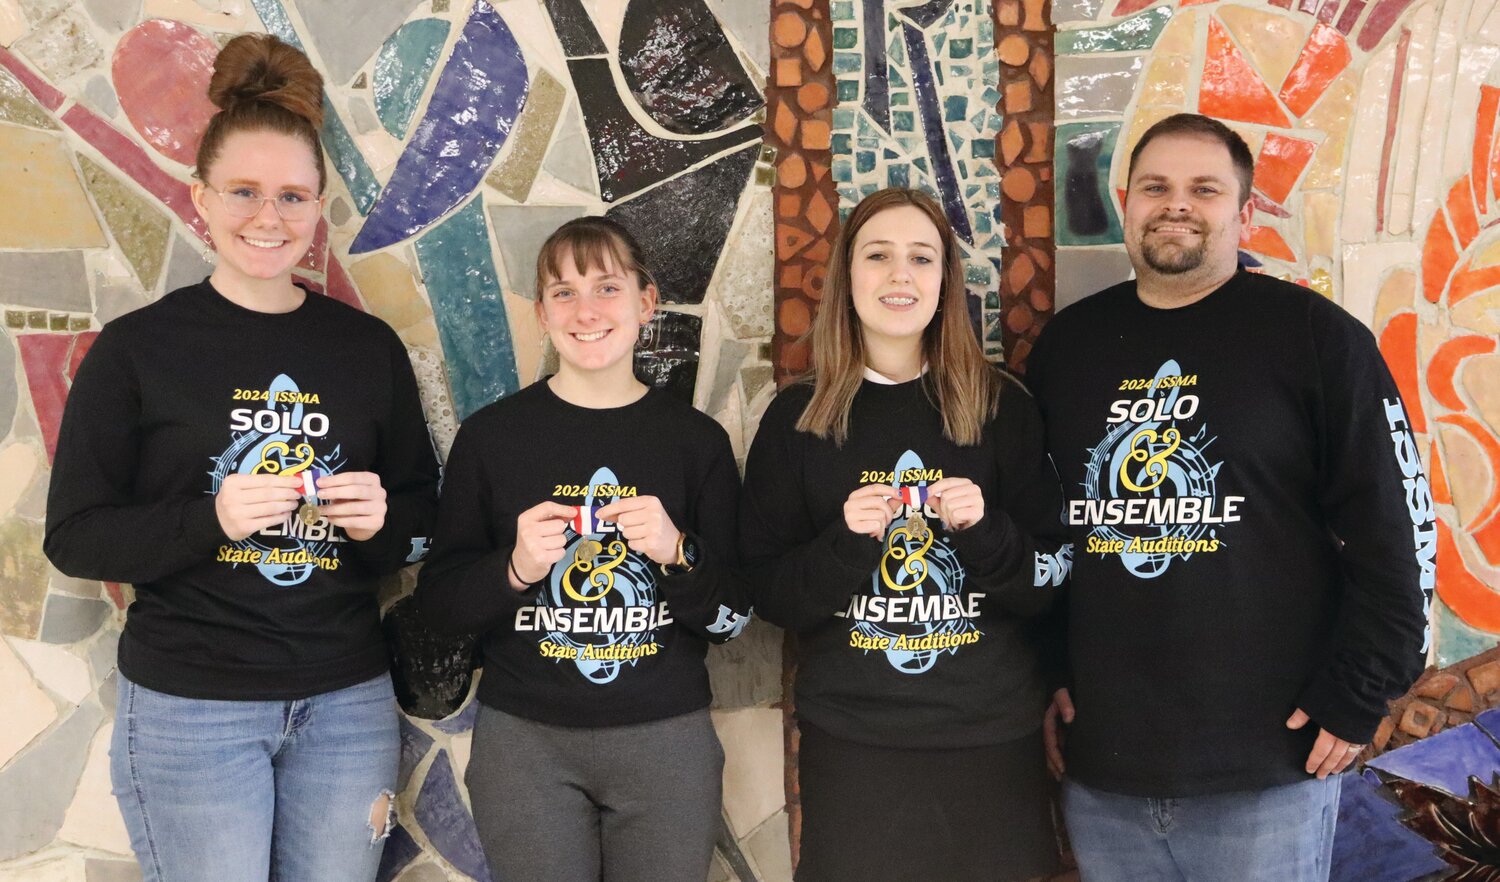 It was a gold medal day for Parke Heritage High School choir students who participated in the Indiana State School Music Association State Solo and Ensemble Contest held Feb. 17 at Perry Meridian High School. Jenna McVay, Kim Koren and Ella Lacy all earned gold ratings for their solo performances. Lacy performed “Homeward Bound” arranged by Jay Althouse. Koren’s song was “The Vagabond” by Ralph Vaughn Williams. McVay sang “Amarilli, Mia Bella” by Giulio Caccini, which was all in Italian. The choir director is Alec Moeller. Pictred, from left, are McVay, Lacy, Koren and Moeller.